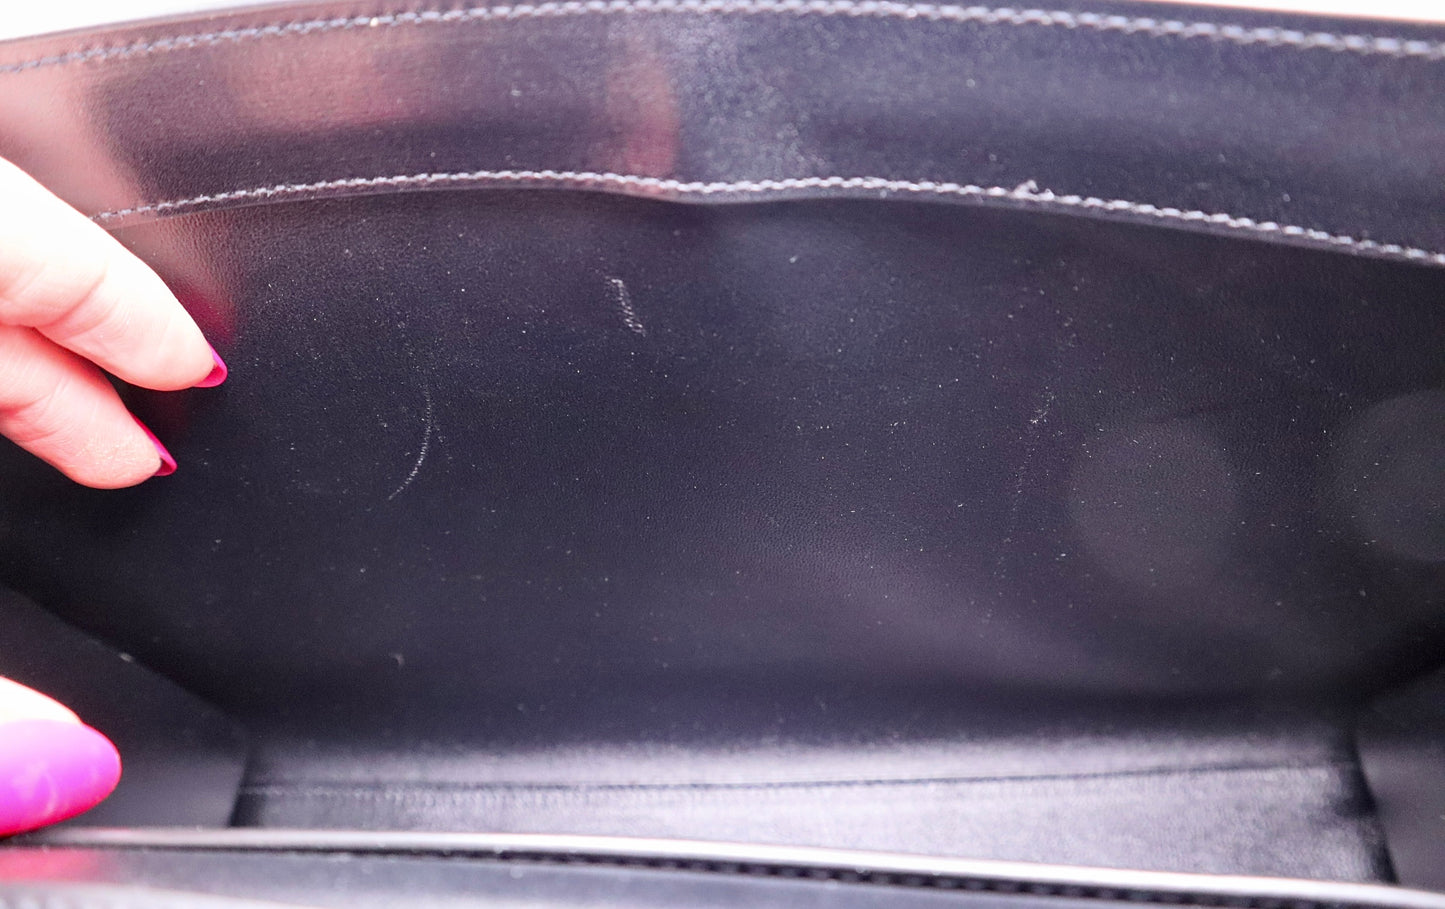 Inside of YSL bag with scuff marks on side